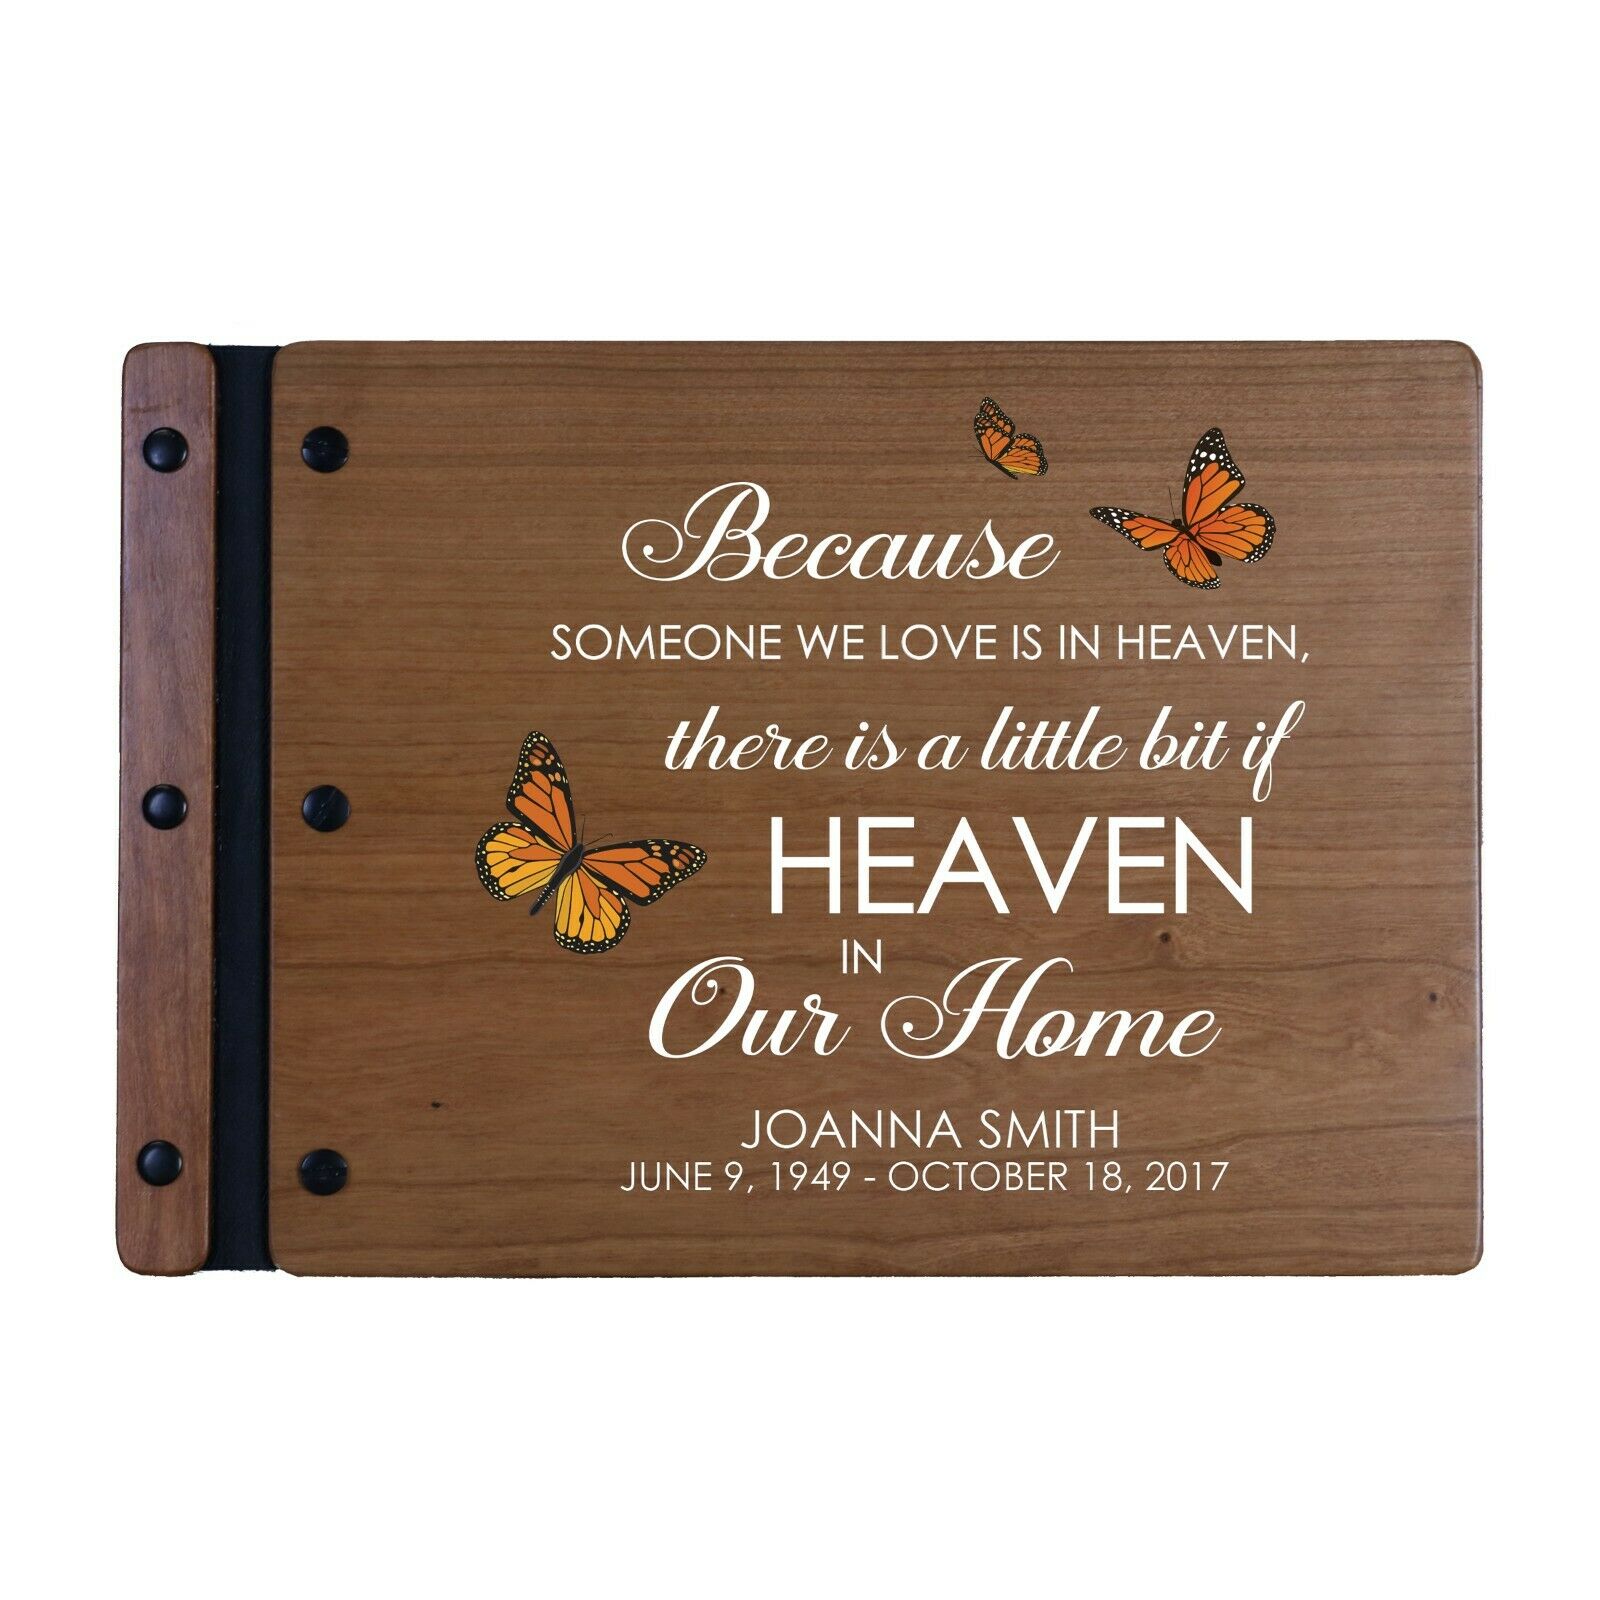 Custom Memorial Funeral Guest Book For Loss Of Loved One 12x8 - Someone We Love